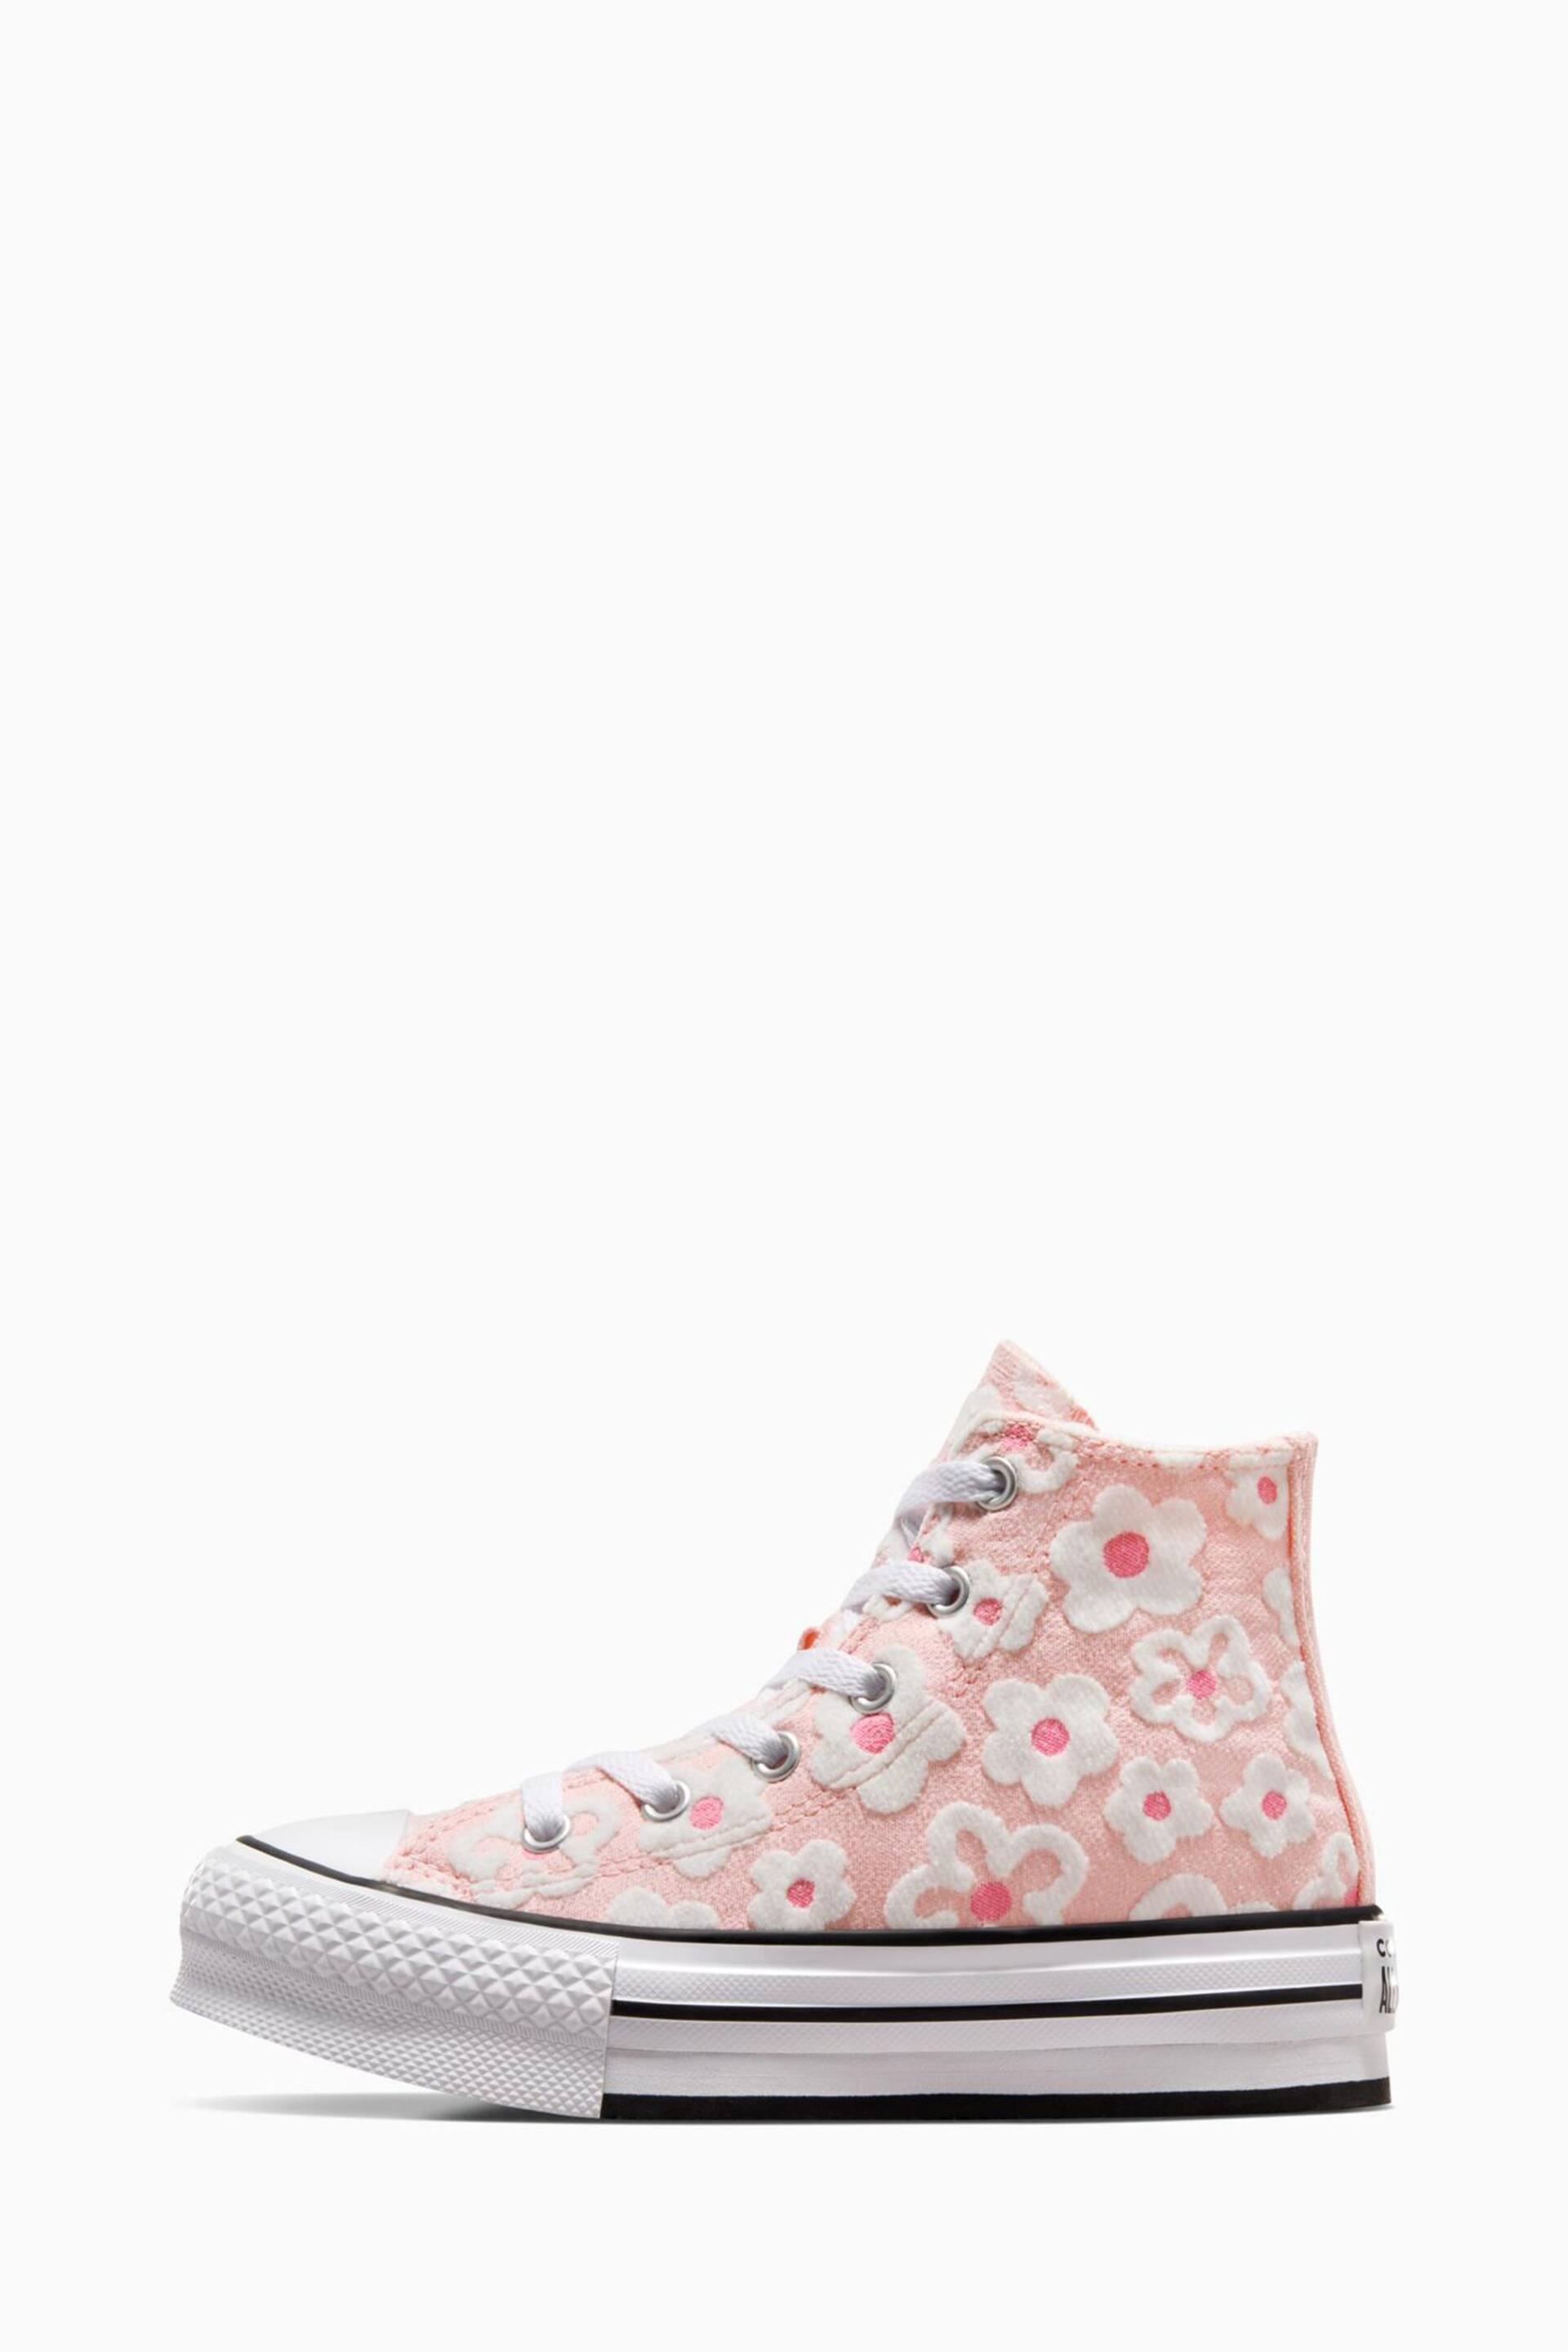 Converse Pink Floral Textured Eva Lift Youth Trainers - Image 2 of 13